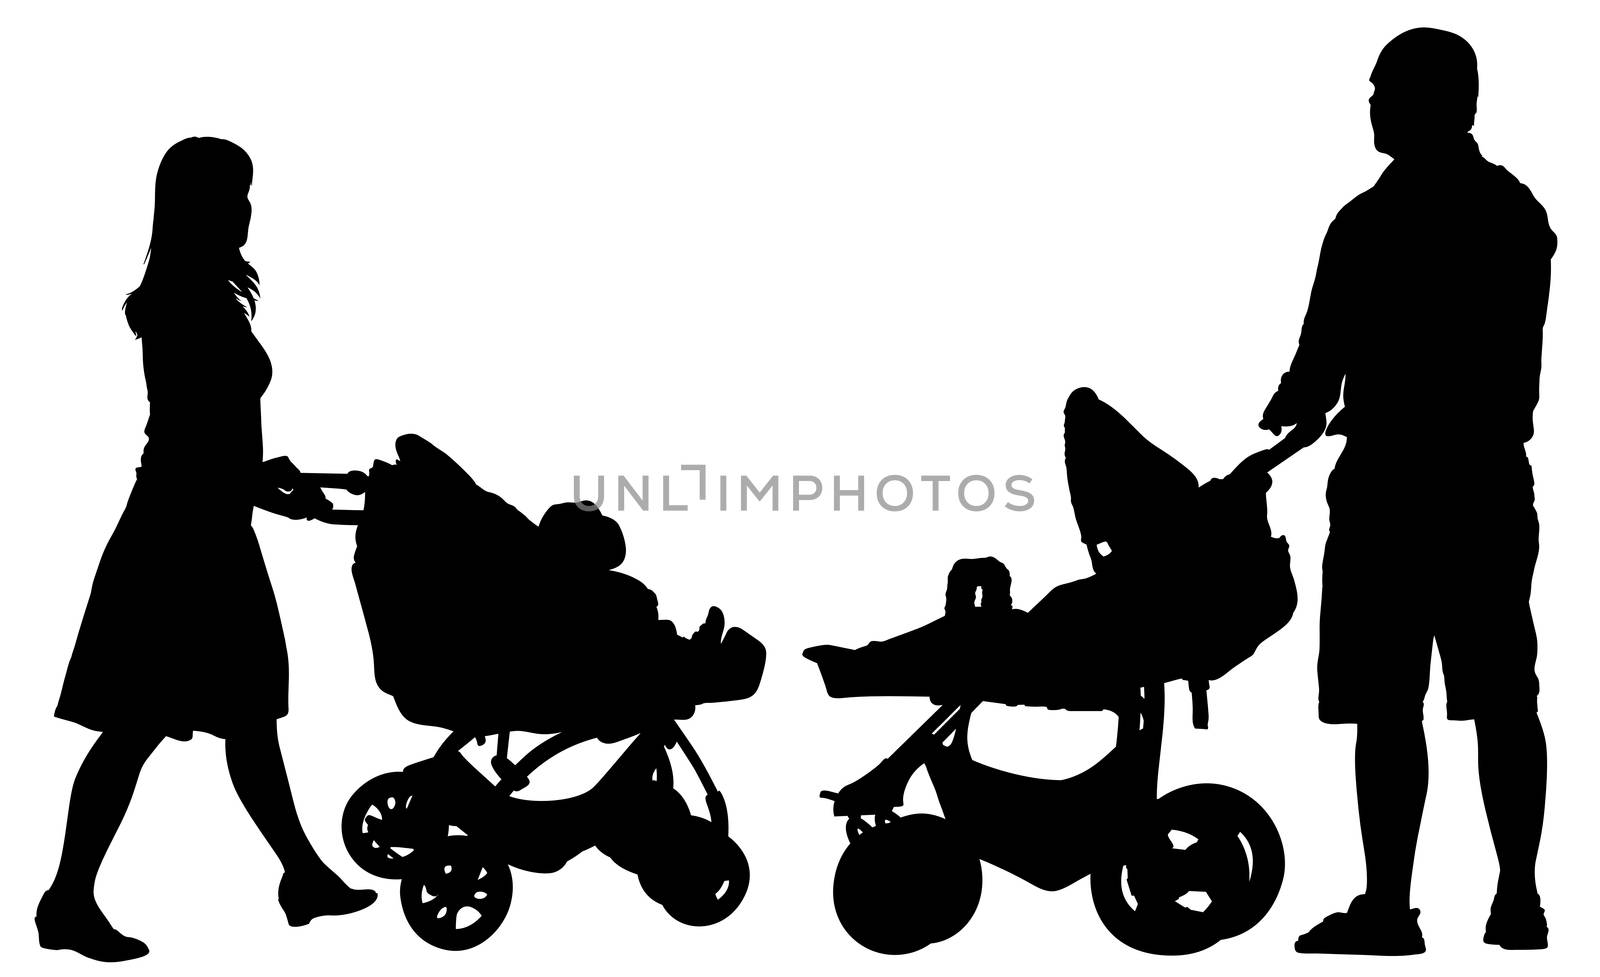 Illustration of a parents silhouette isolated on white